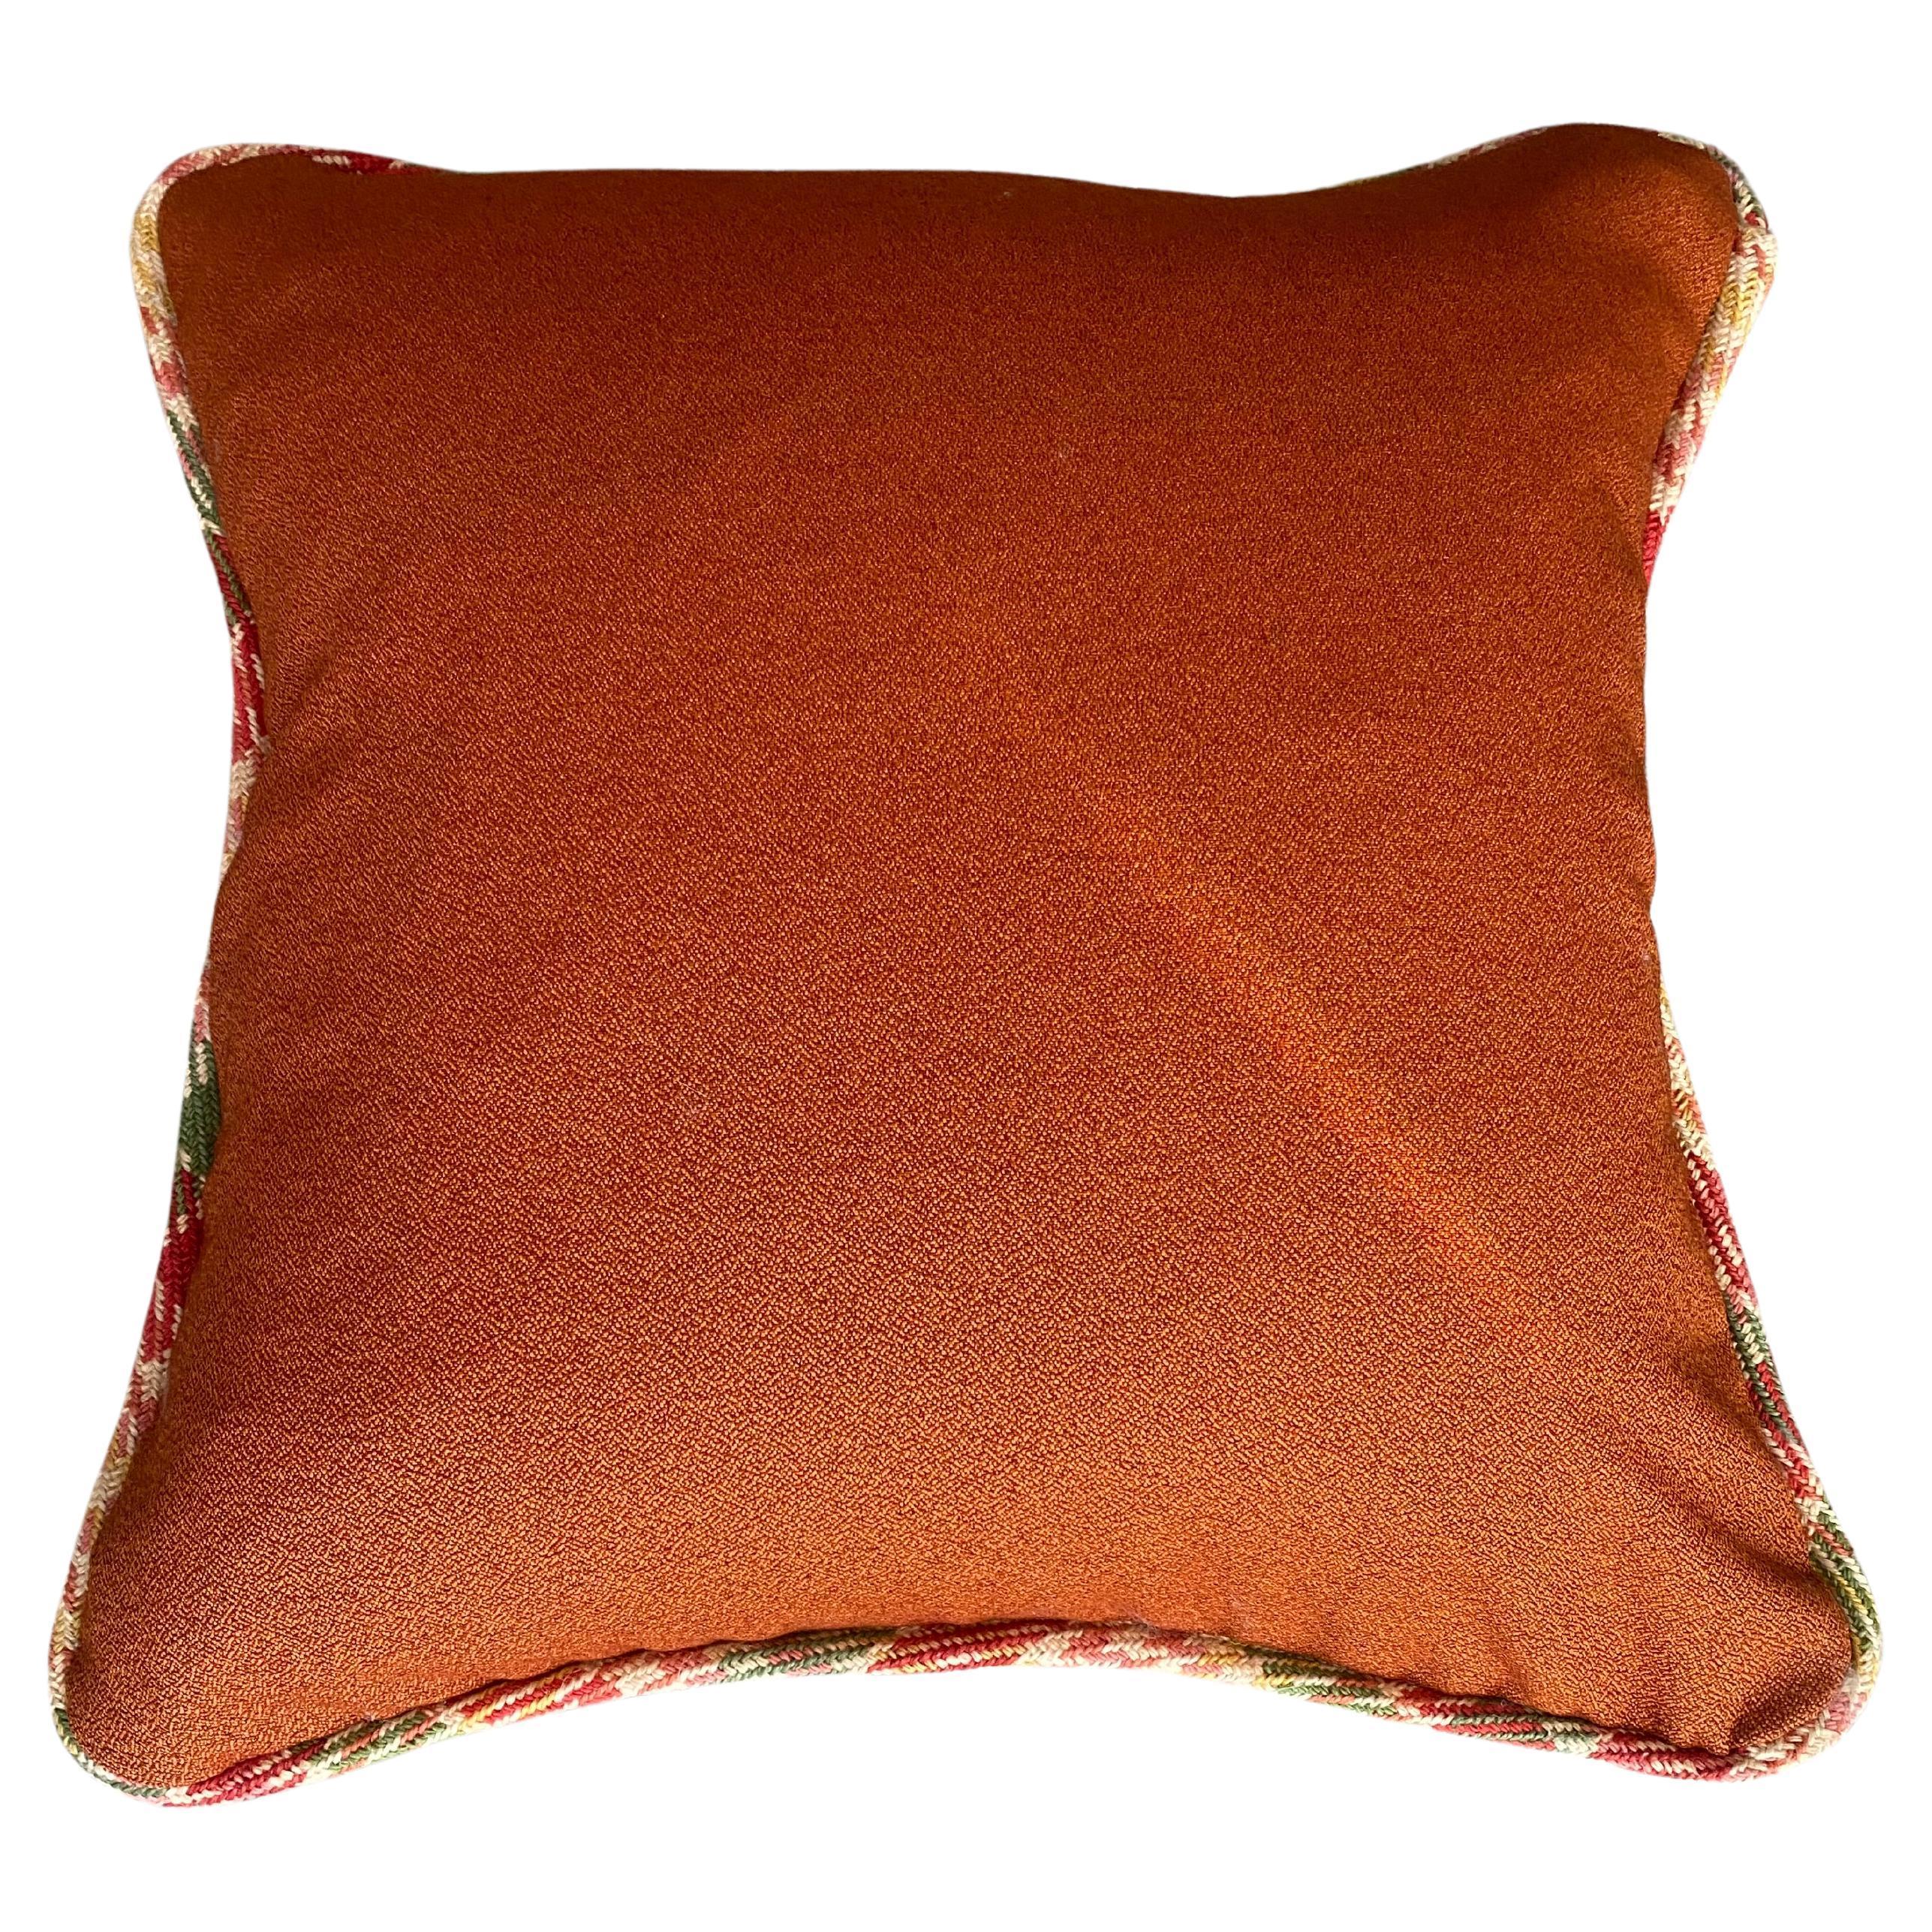 Contemporary Velvet Bird Pillows with Fall Landscape and Plaid Trim with Deep Orange Wool 